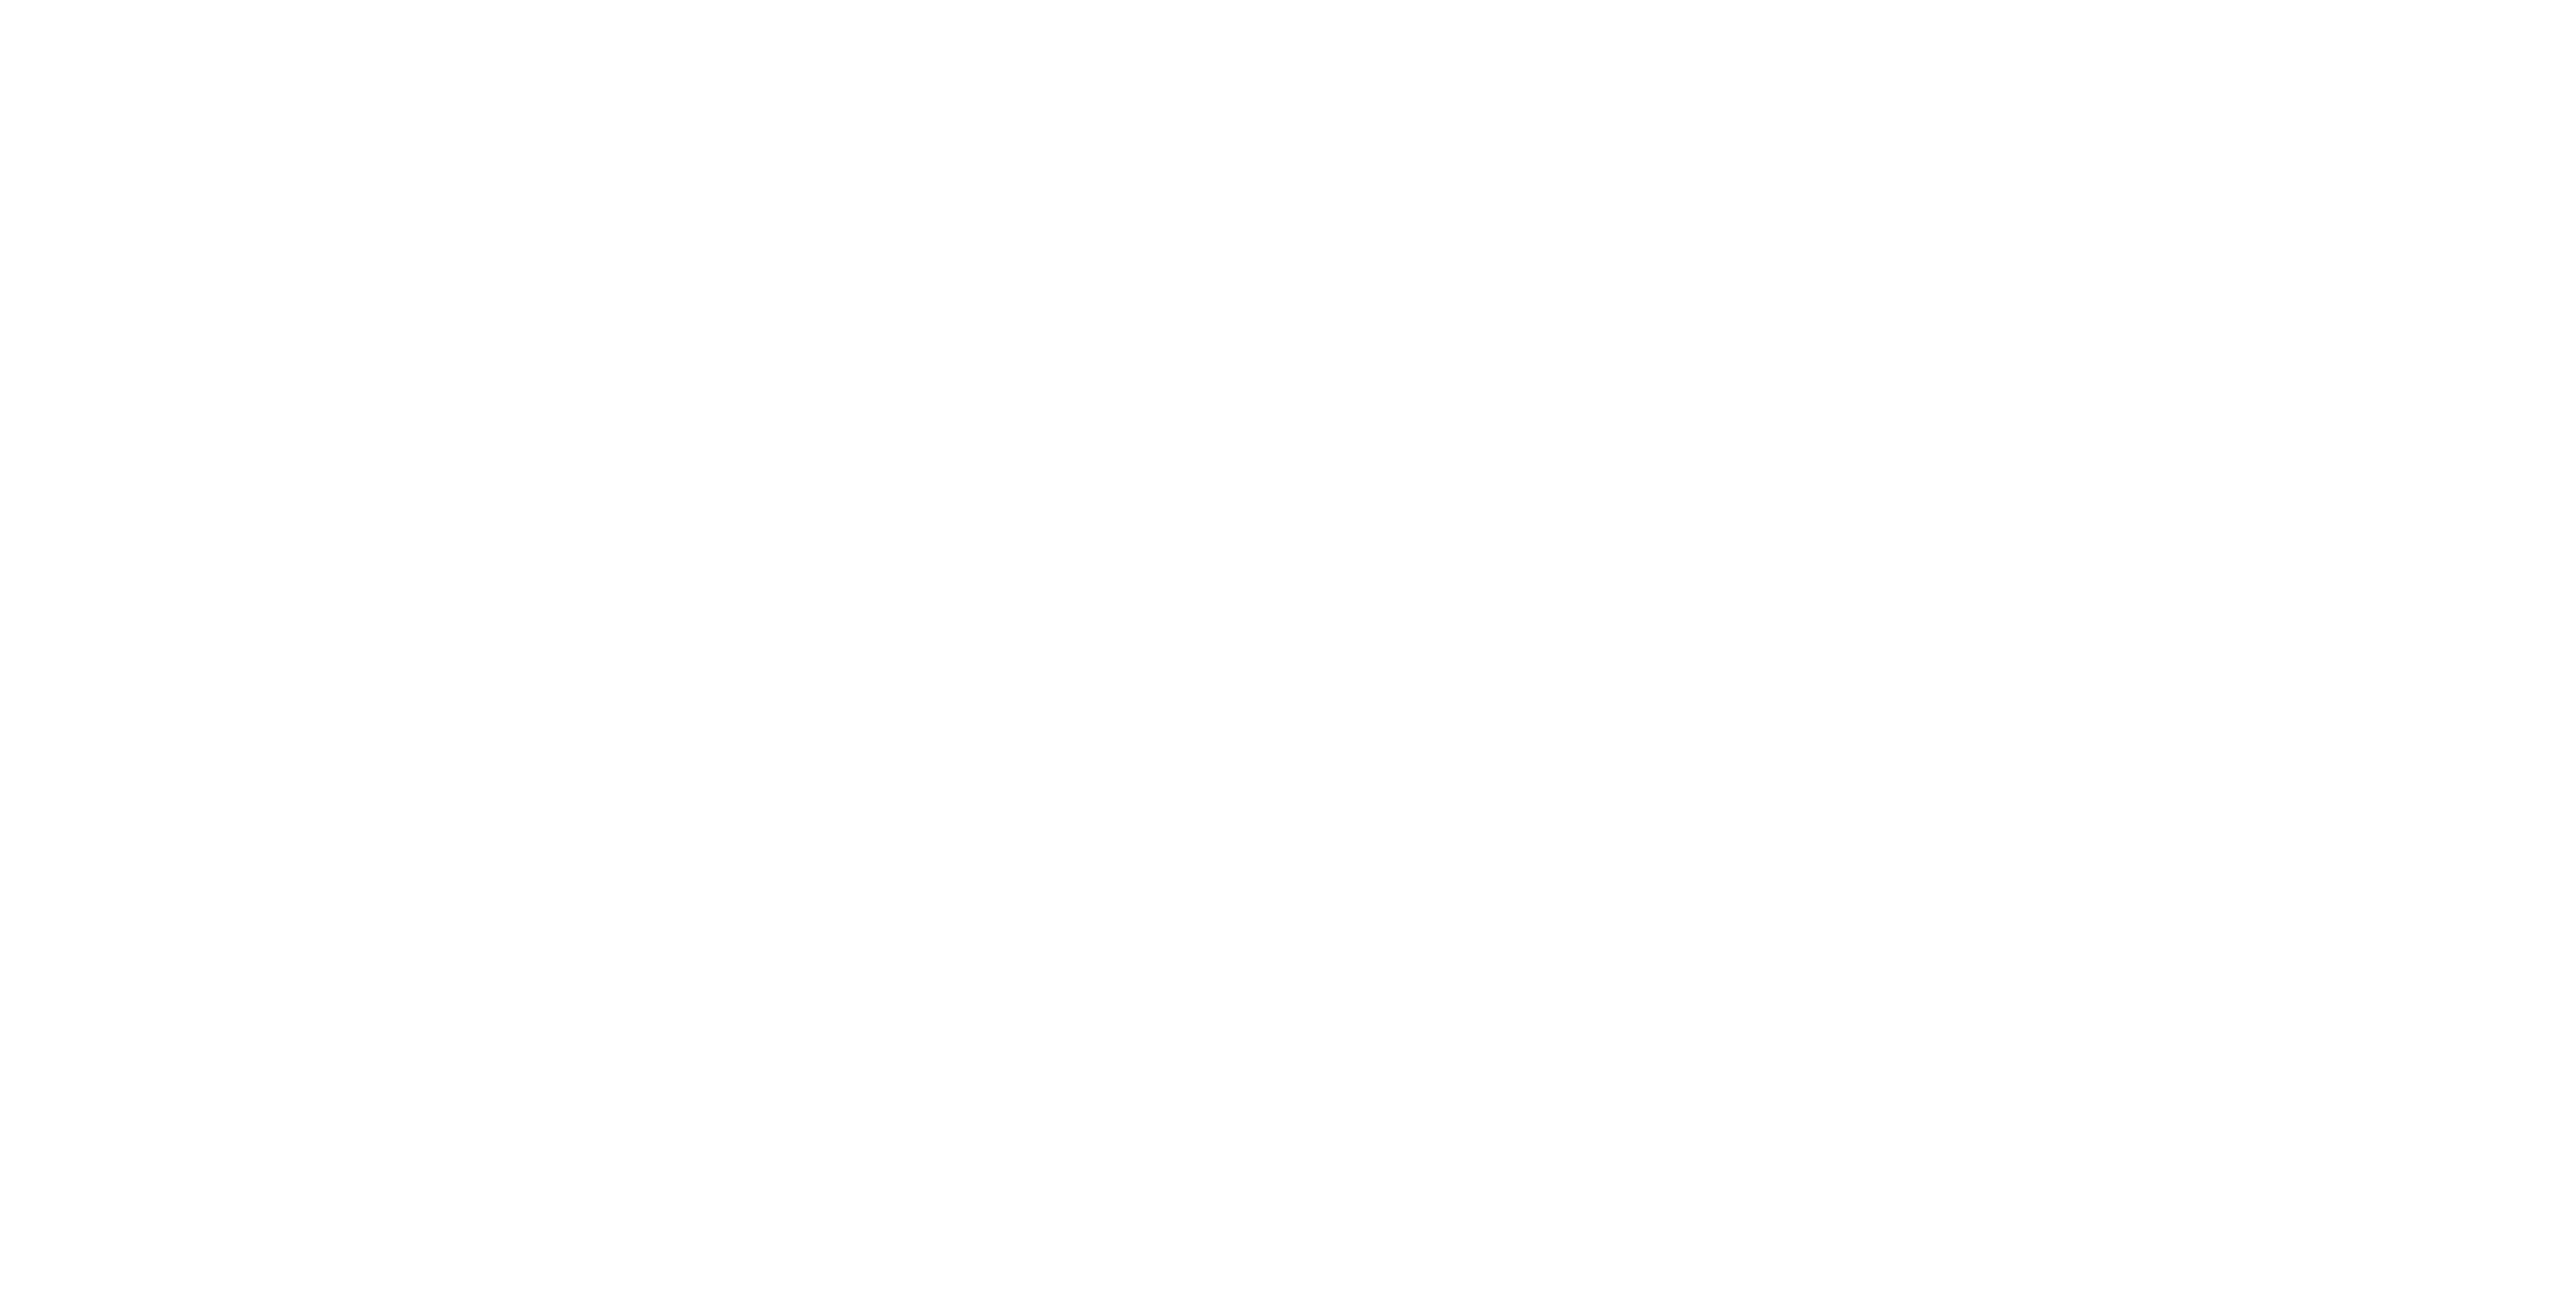 Lace Flower Png Clip Art Image Gallery Yopriceville High Quality Images And Transparent Png Free Clipart